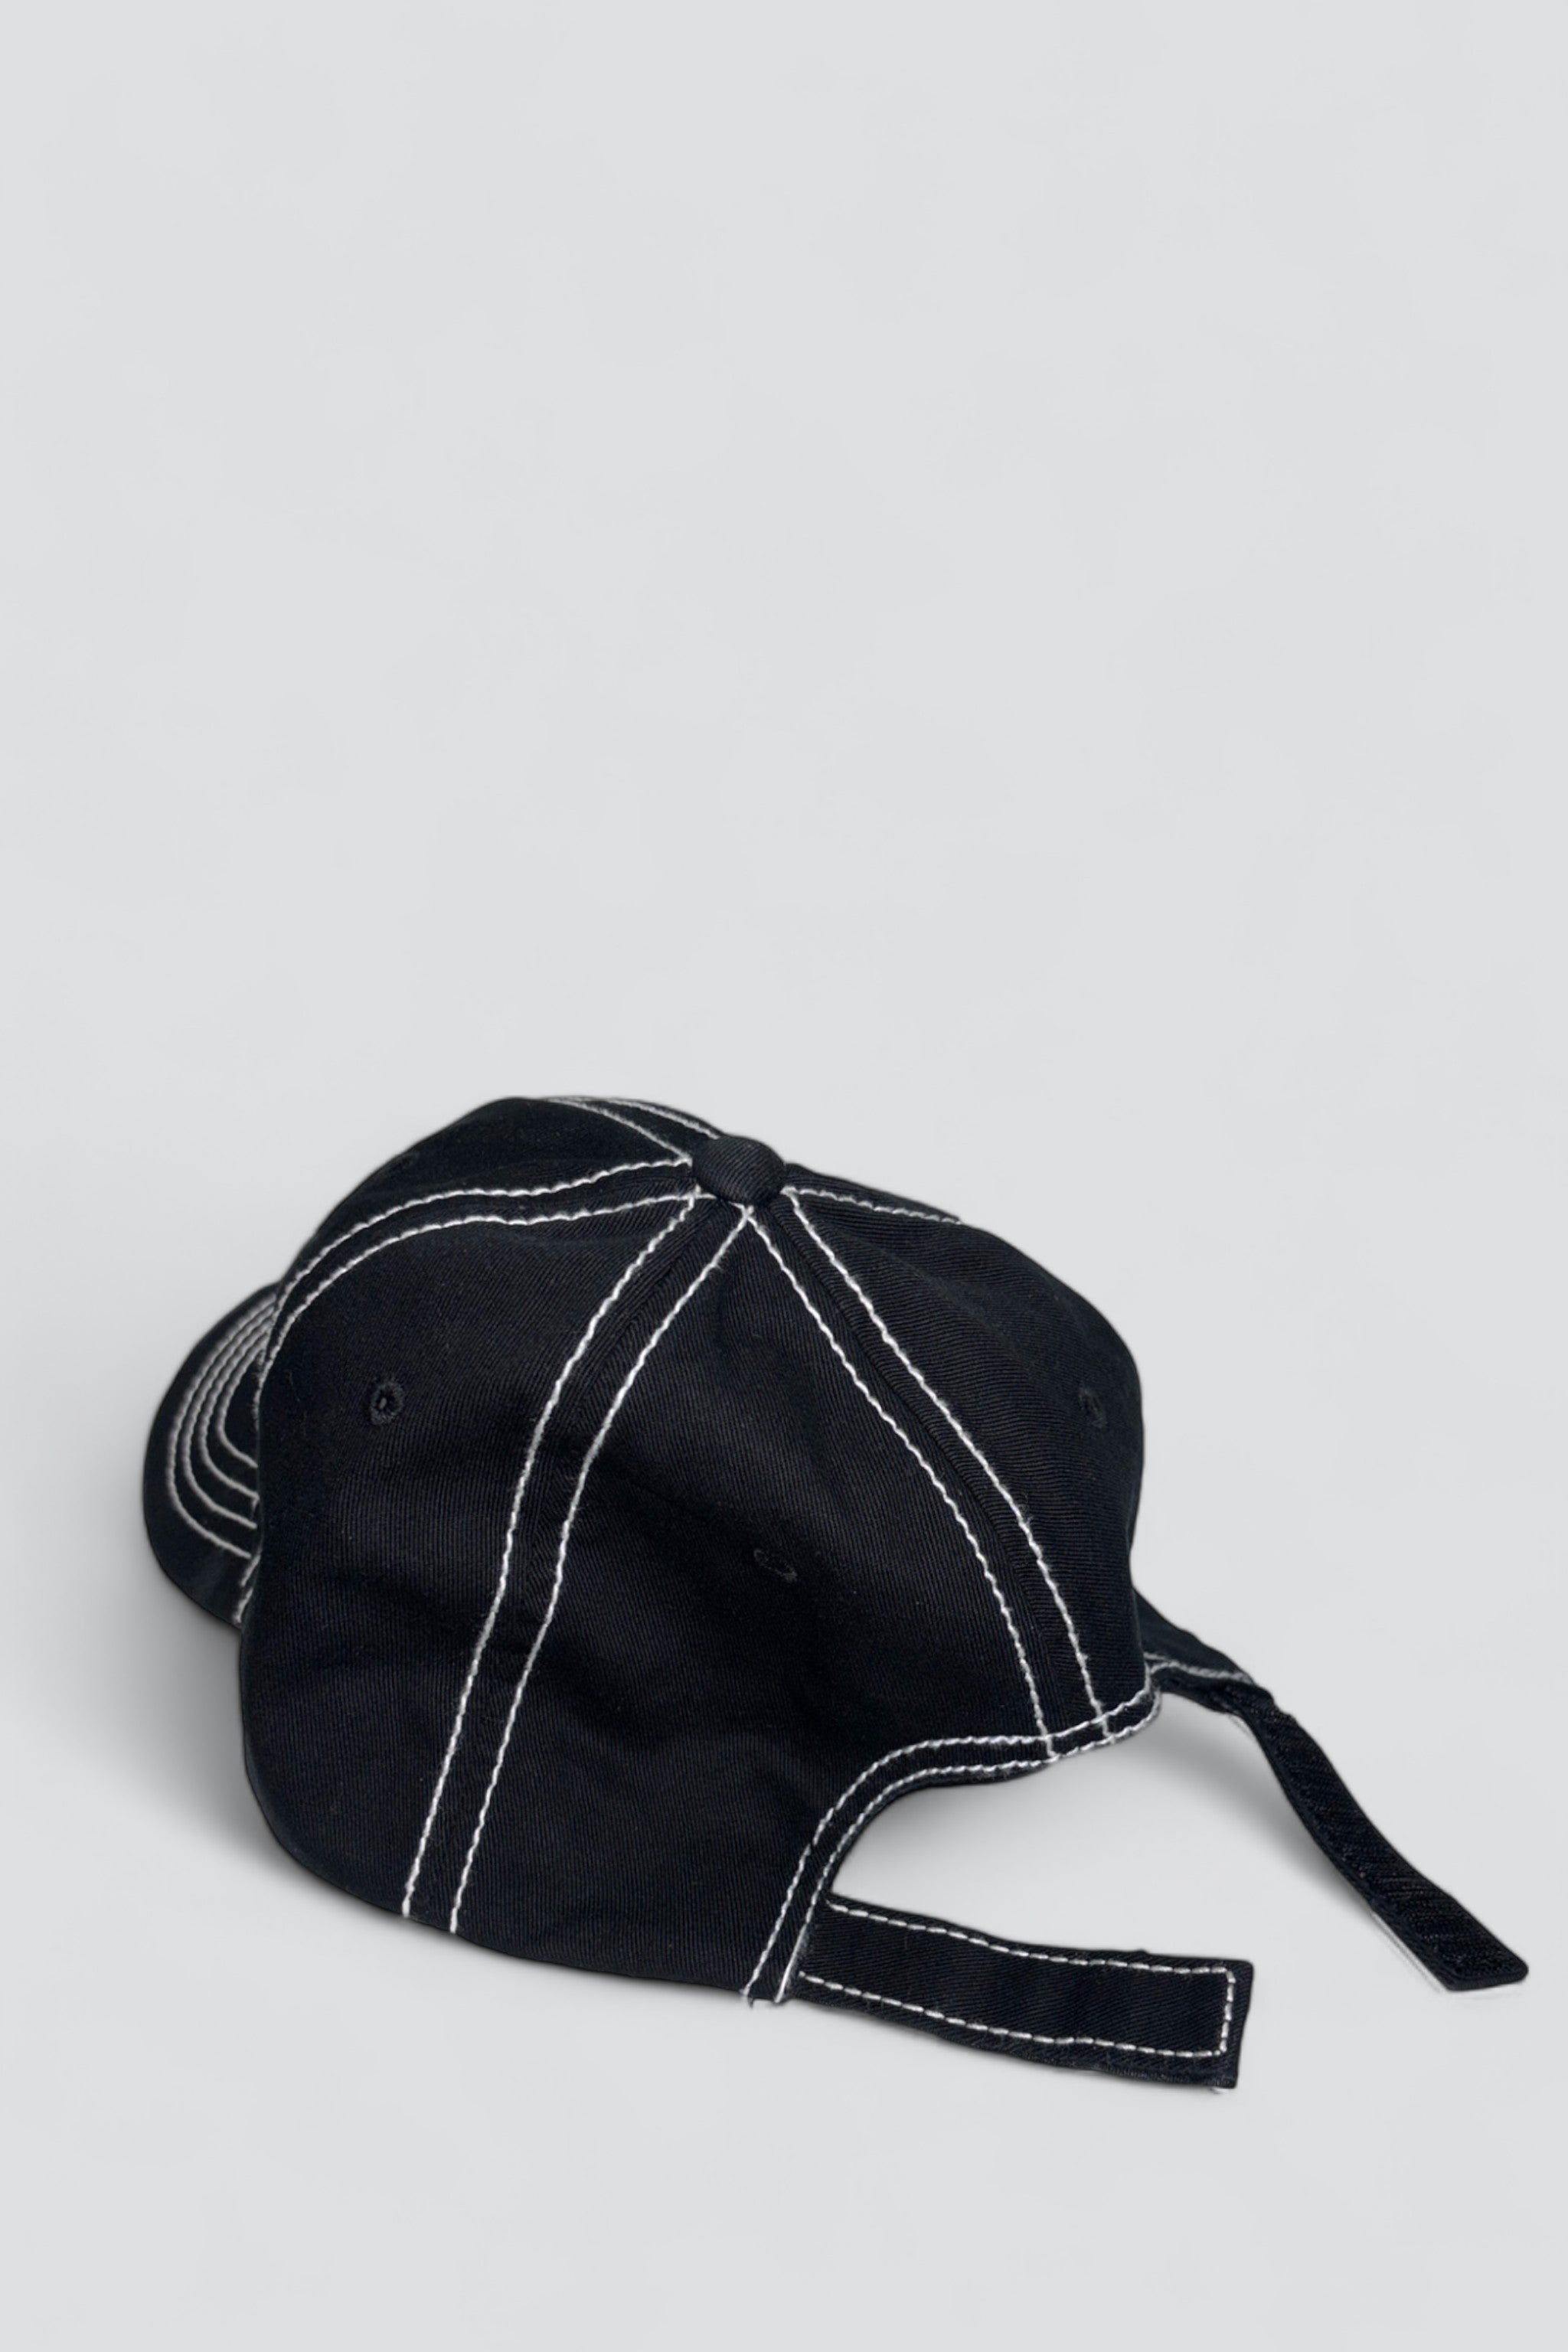 New York Embroidered Contrast Stitch Hat - Black/White